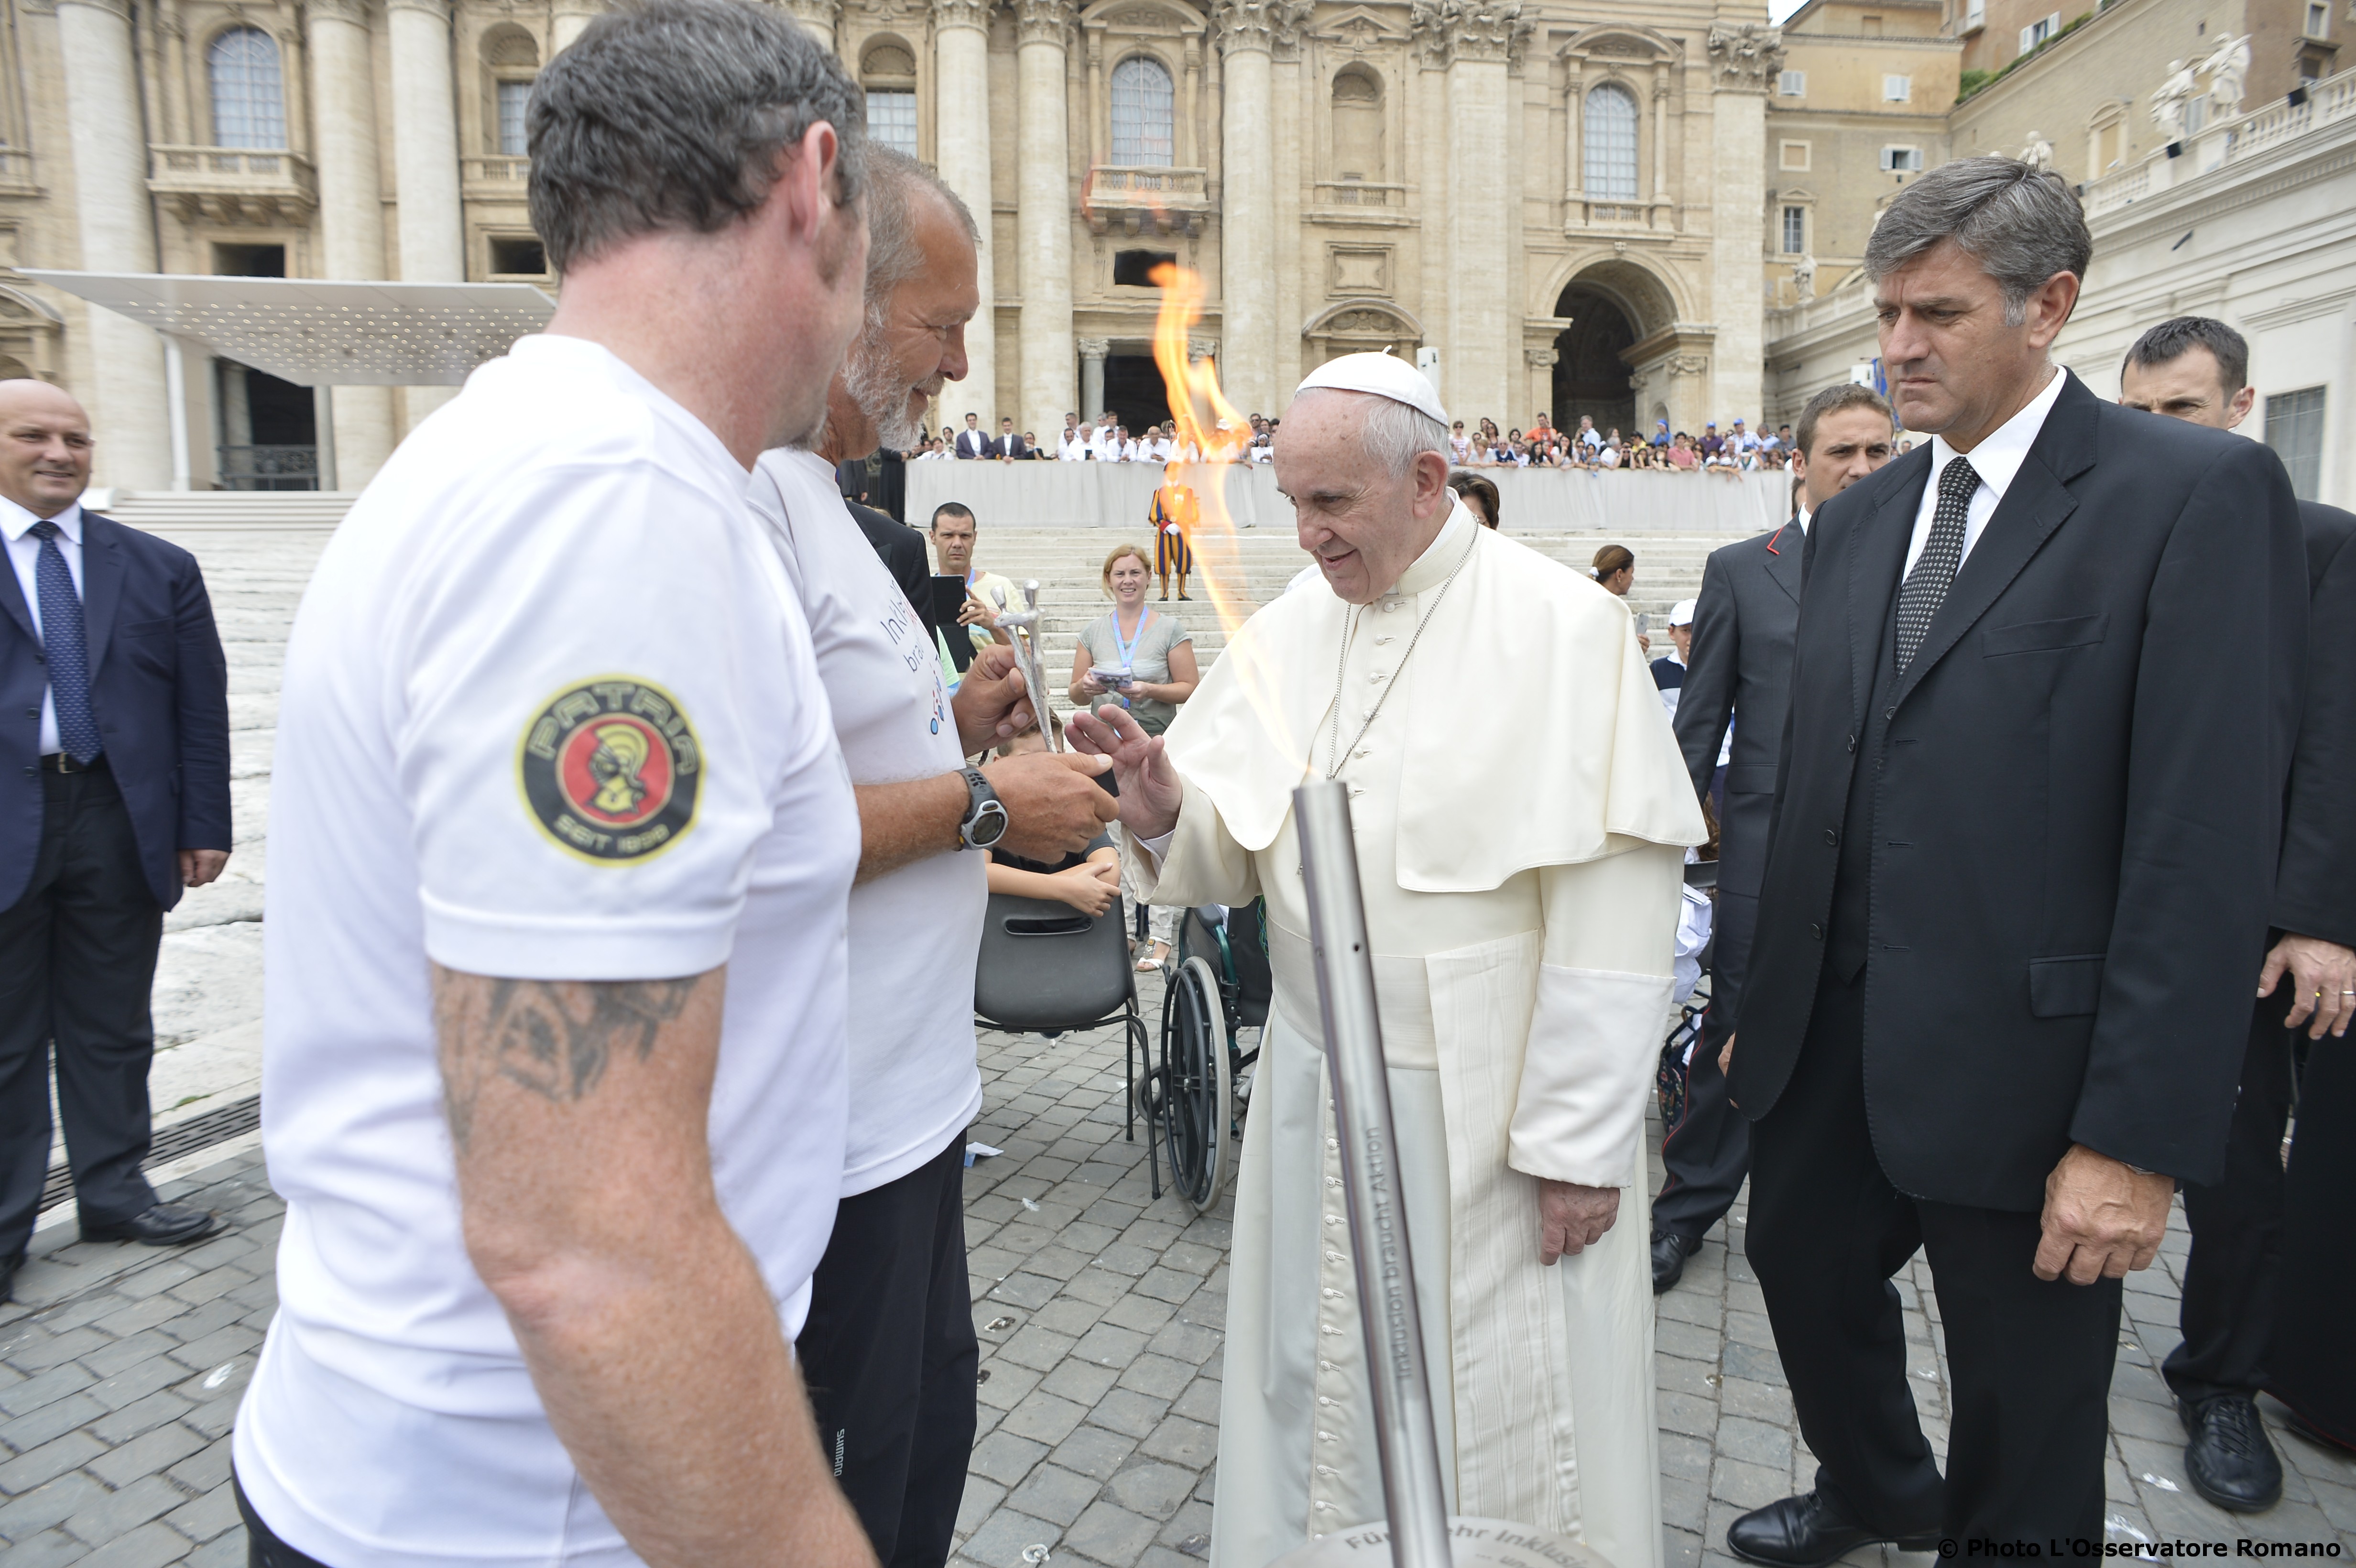 Pope Francis blesses the torch of two Paralympic athletes after the General Audience of Wednesday